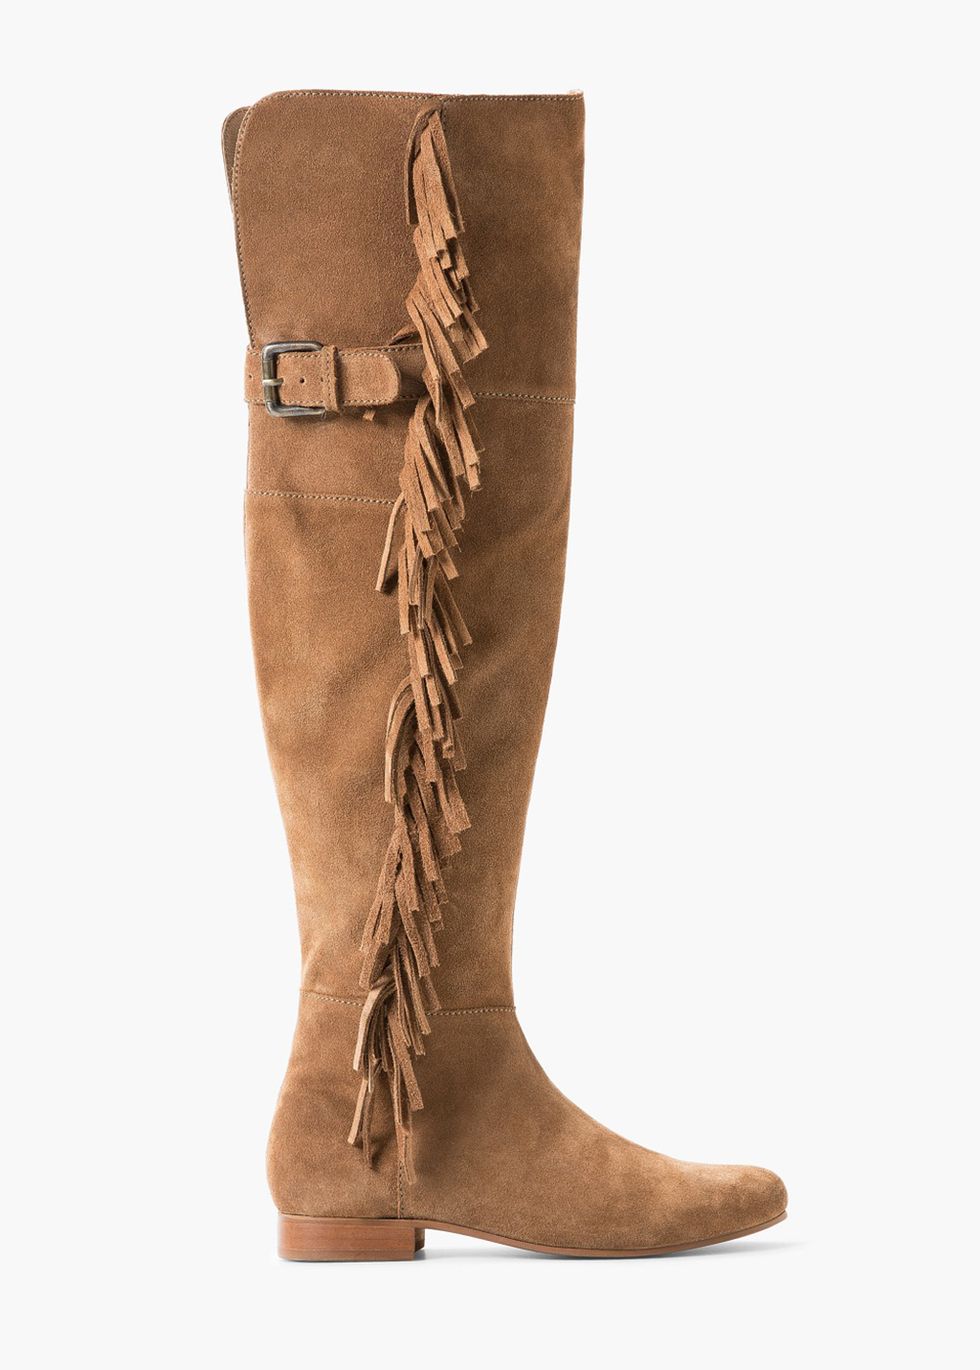 Brown, Boot, Shoe, Riding boot, Tan, Khaki, Liver, Leather, Knee-high boot, Beige, 